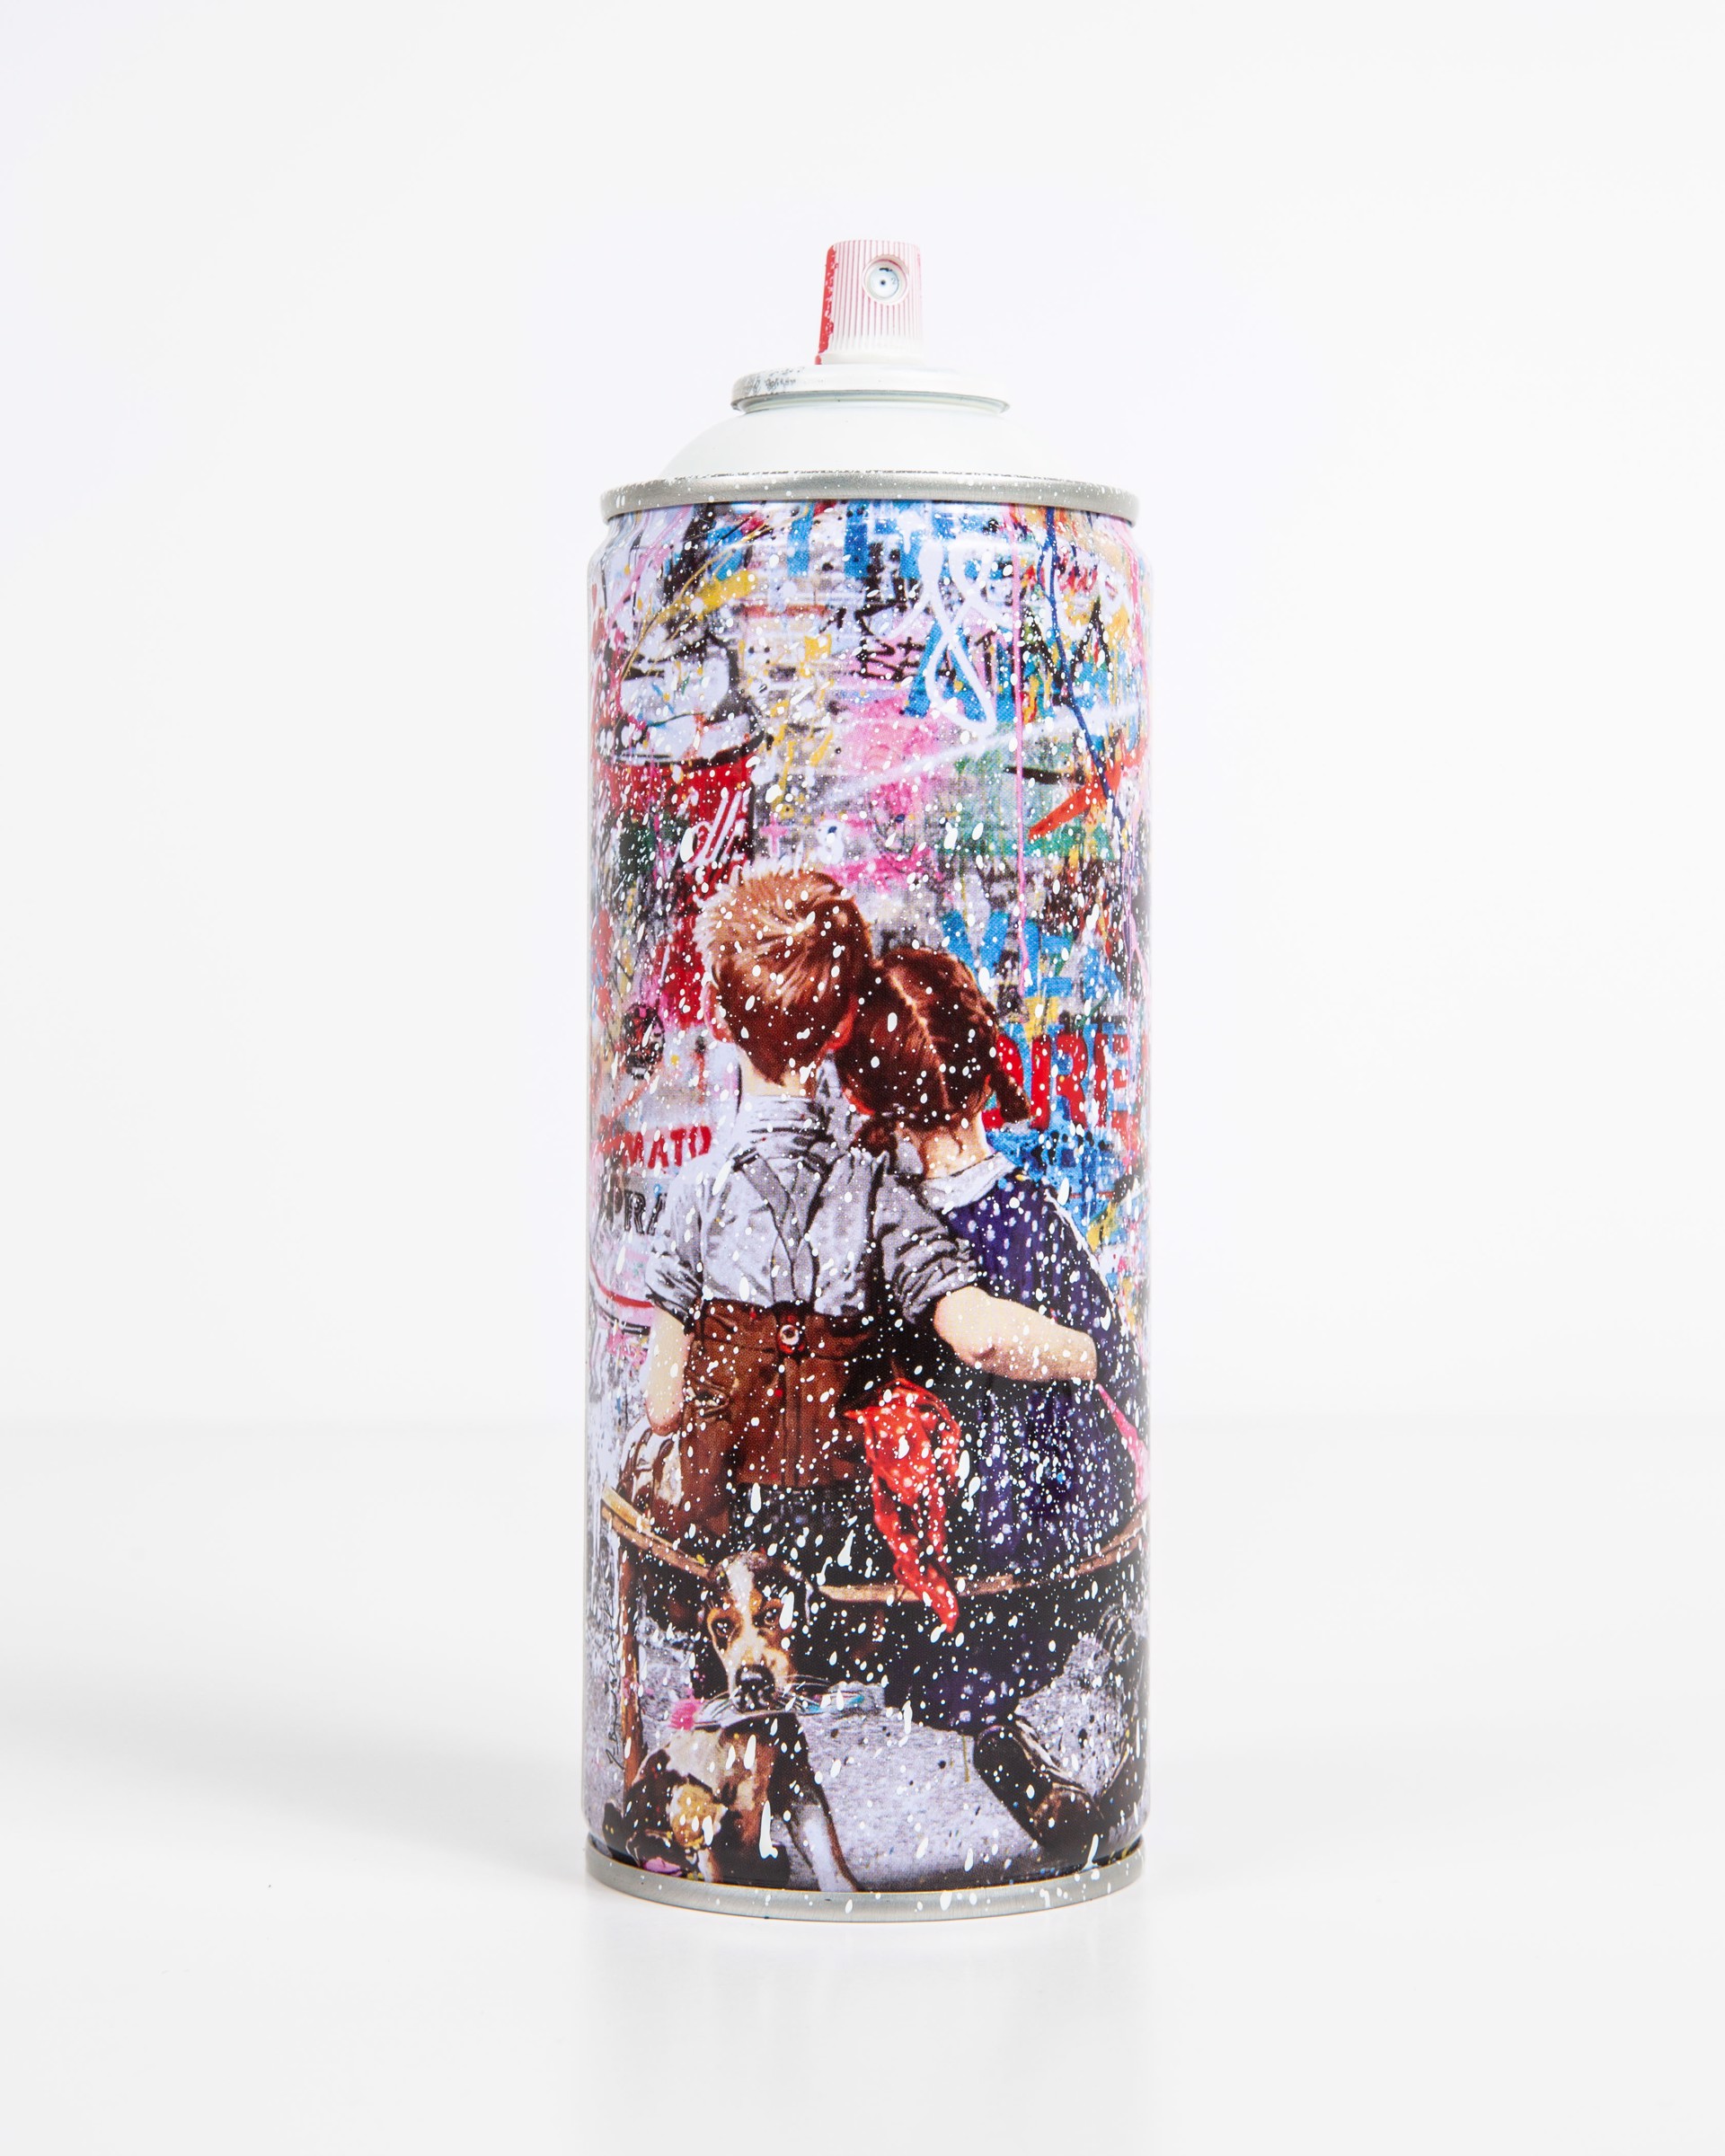 Work Well Together - White by Mr.Brainwash